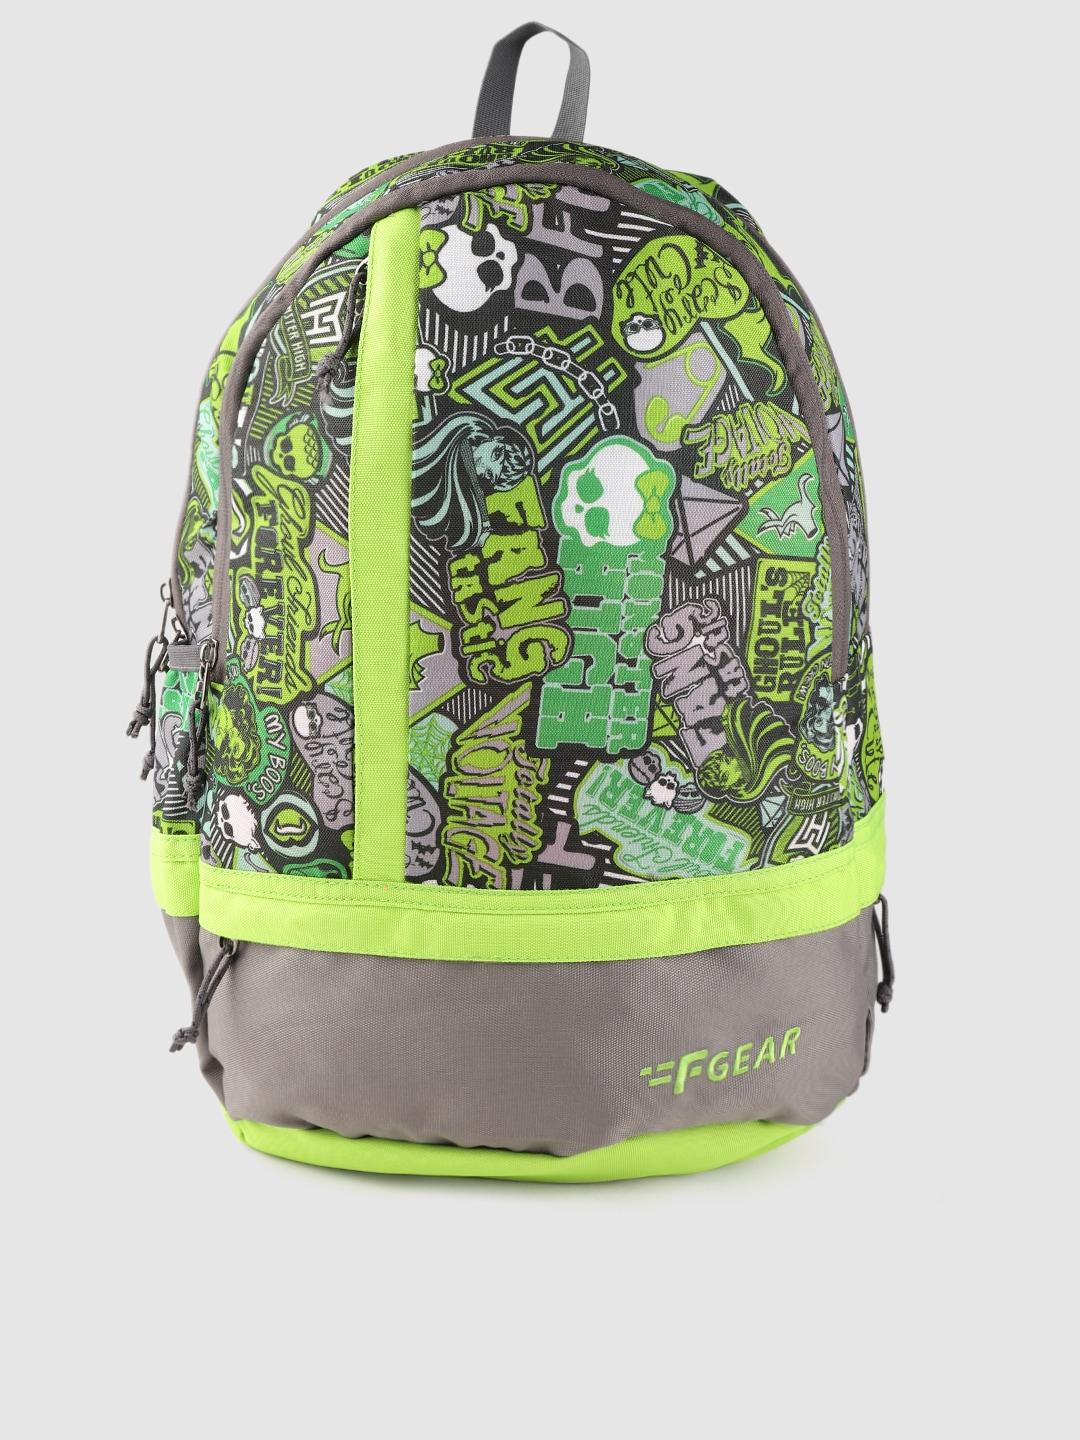 f gear unisex green & grey graphic laptop backpack